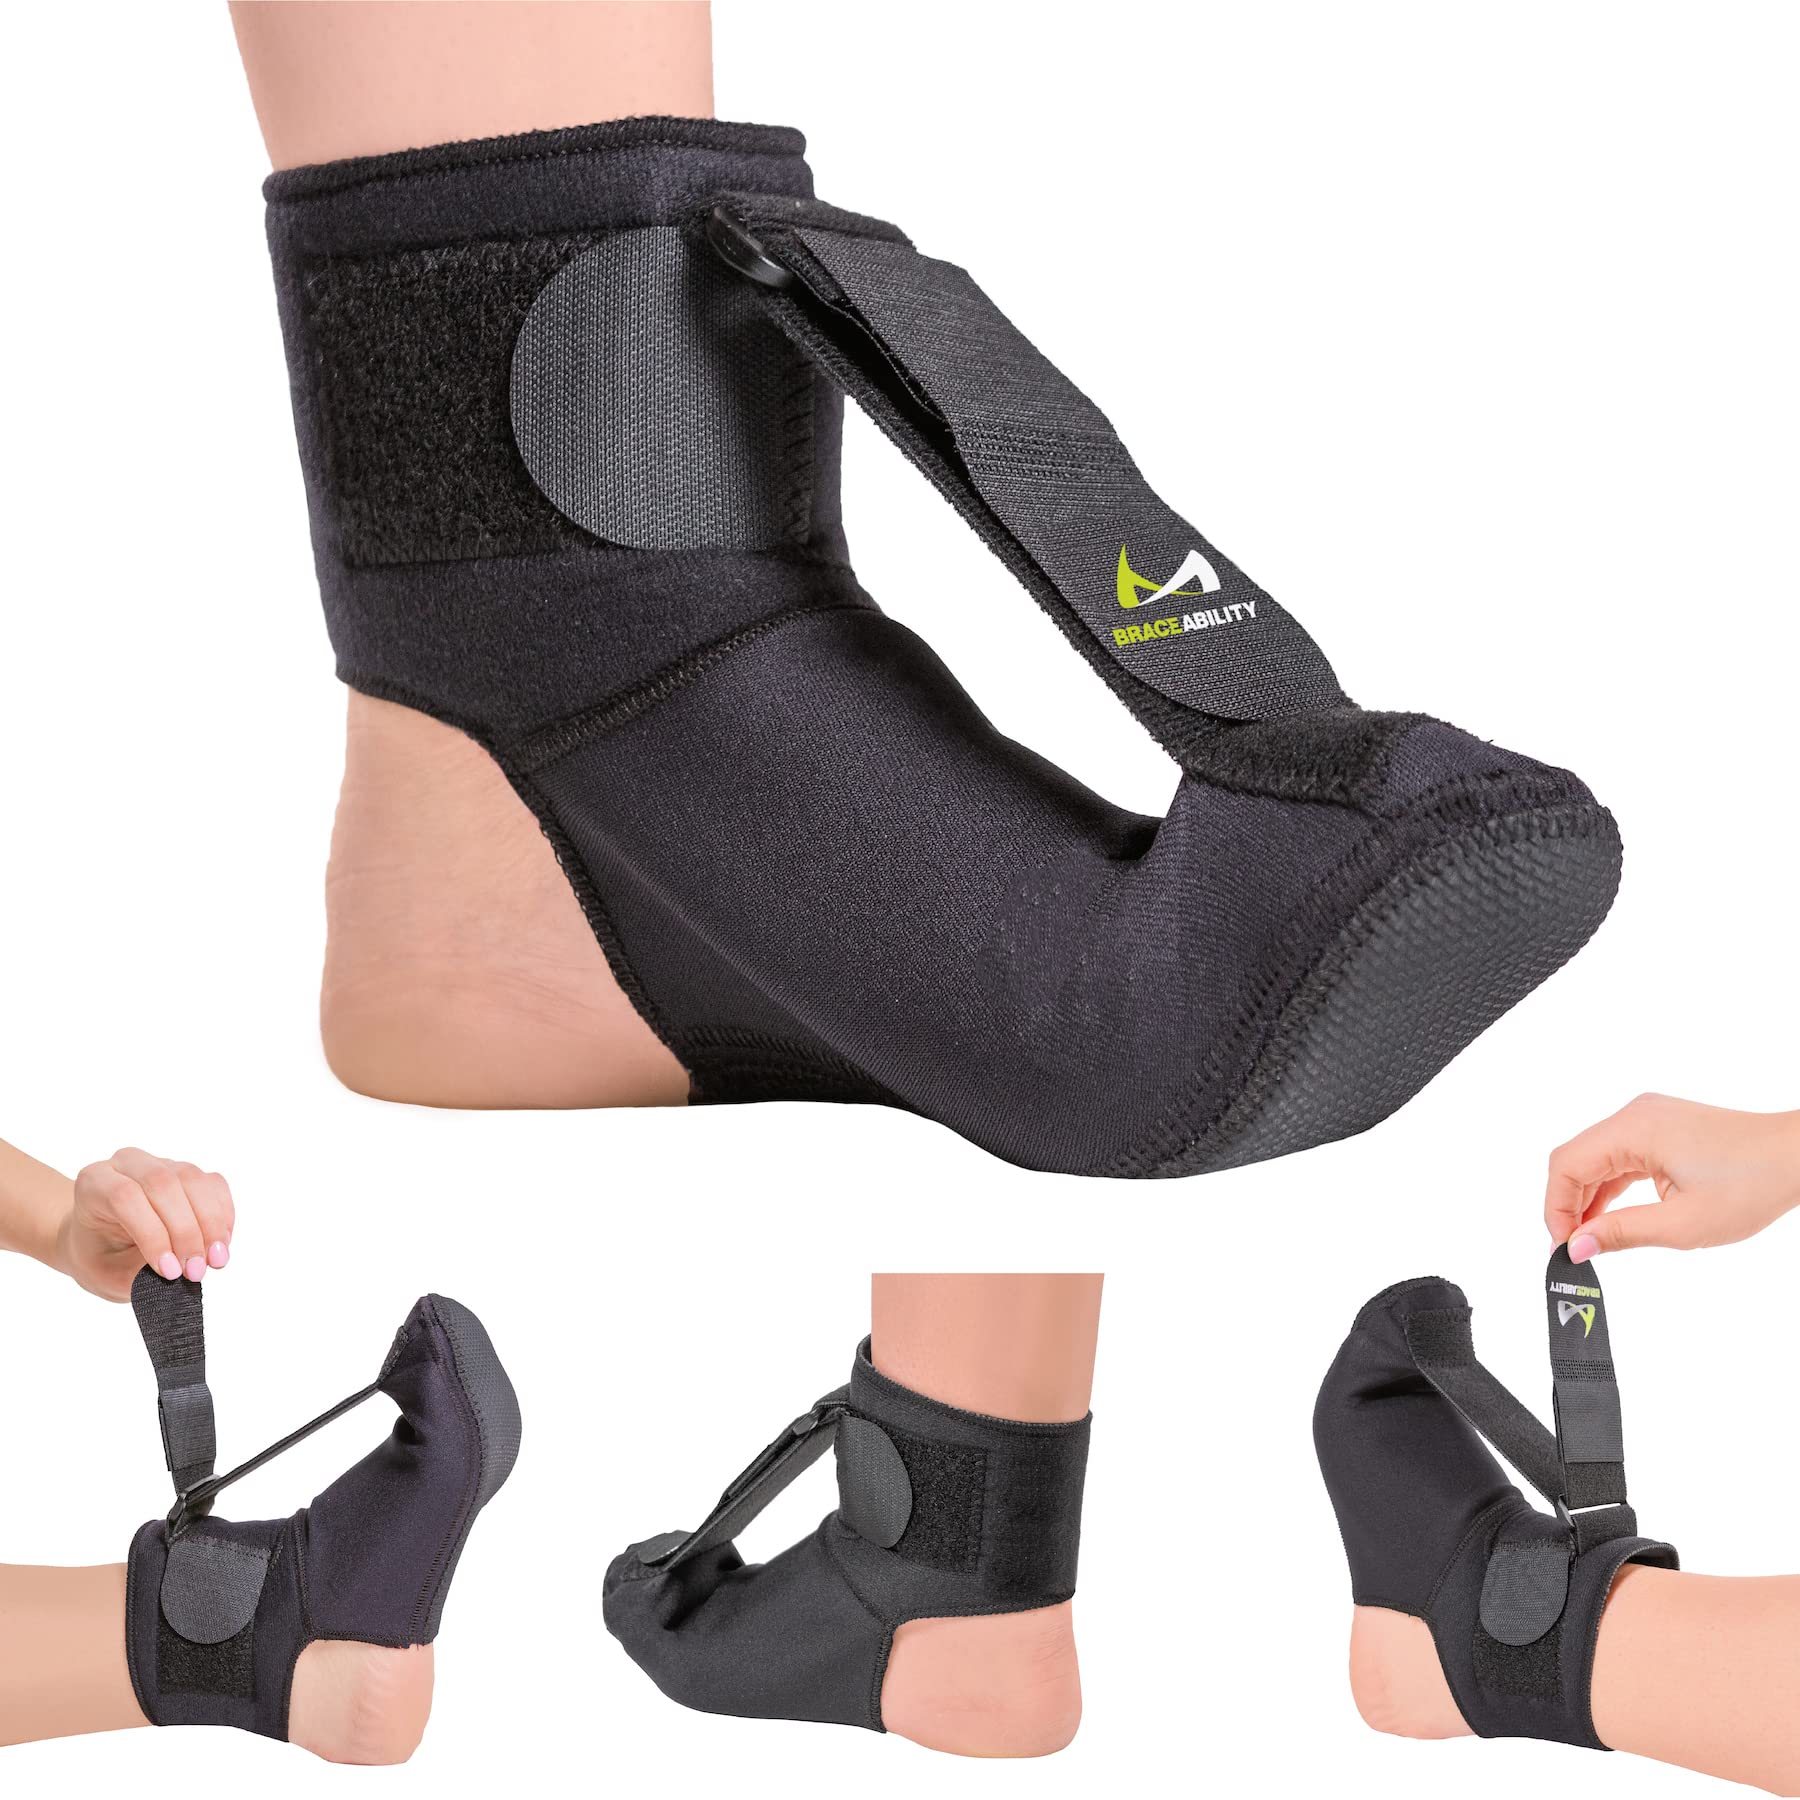 BraceAbility Plantar Fasciitis Night Splint Sock - Soft Plantar Fascia Stretcher Brace, Achilles Tendonitis Sleeping Support Boot, Heel Pain Relief Compression Sleeve for Right or Left Foot (Small)